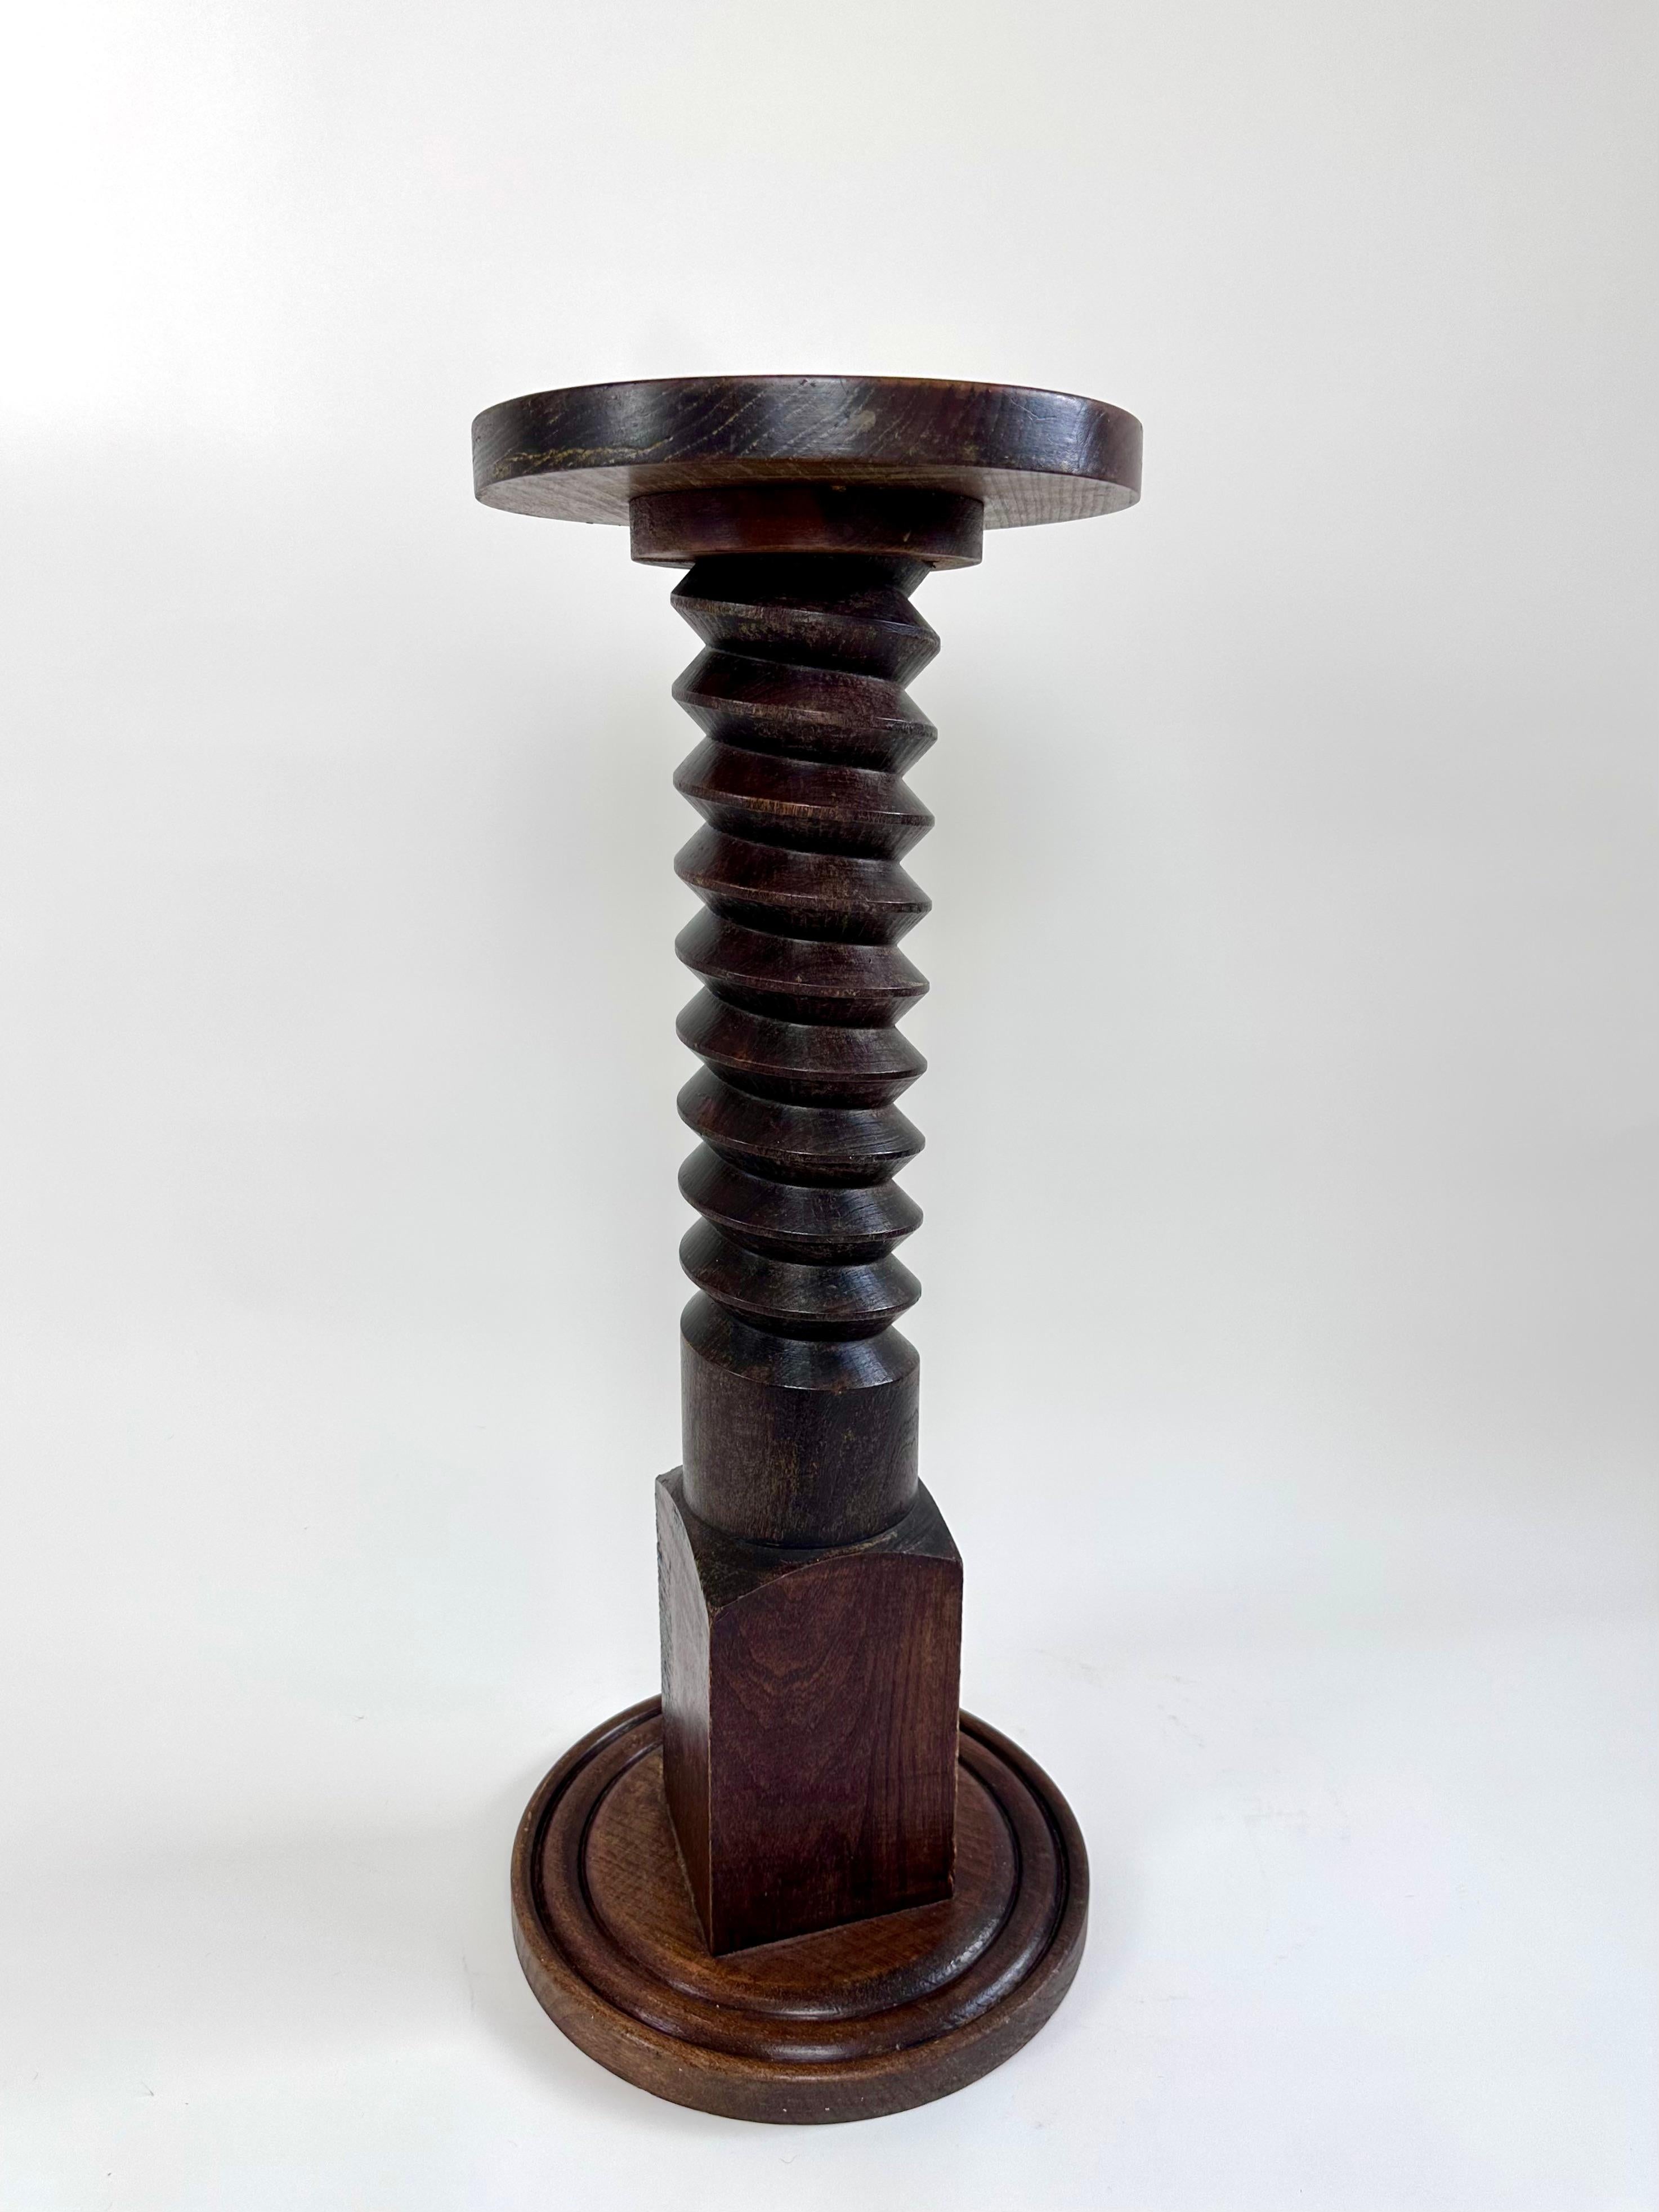 Mid-sized turned oak plinth/pedestal reminiscent of designs by Charles Dudouyt sourced from central rural France.

Dating from the early-mid 20th century.

Wood has a lovely rich colour.

In excellent condition with signs of age but no damage and no